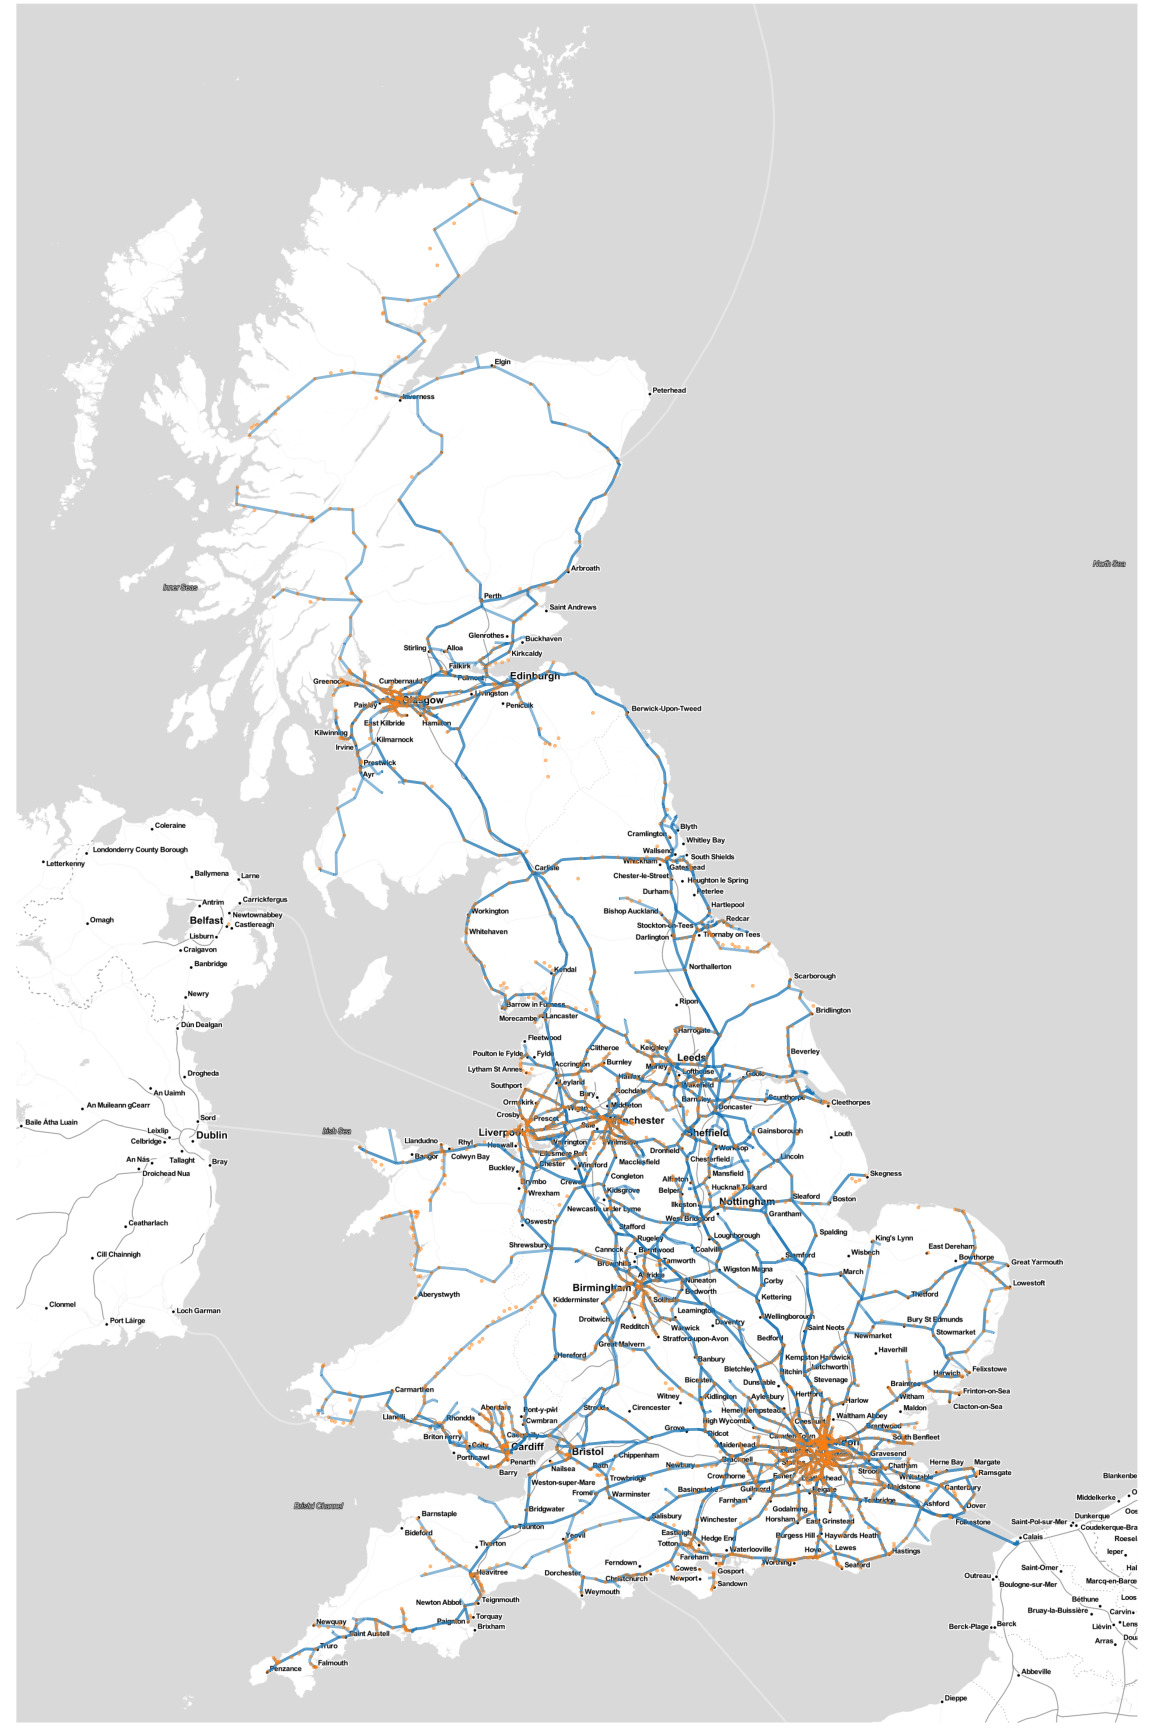 Railway stations and segments of the network on map of Great Britain.